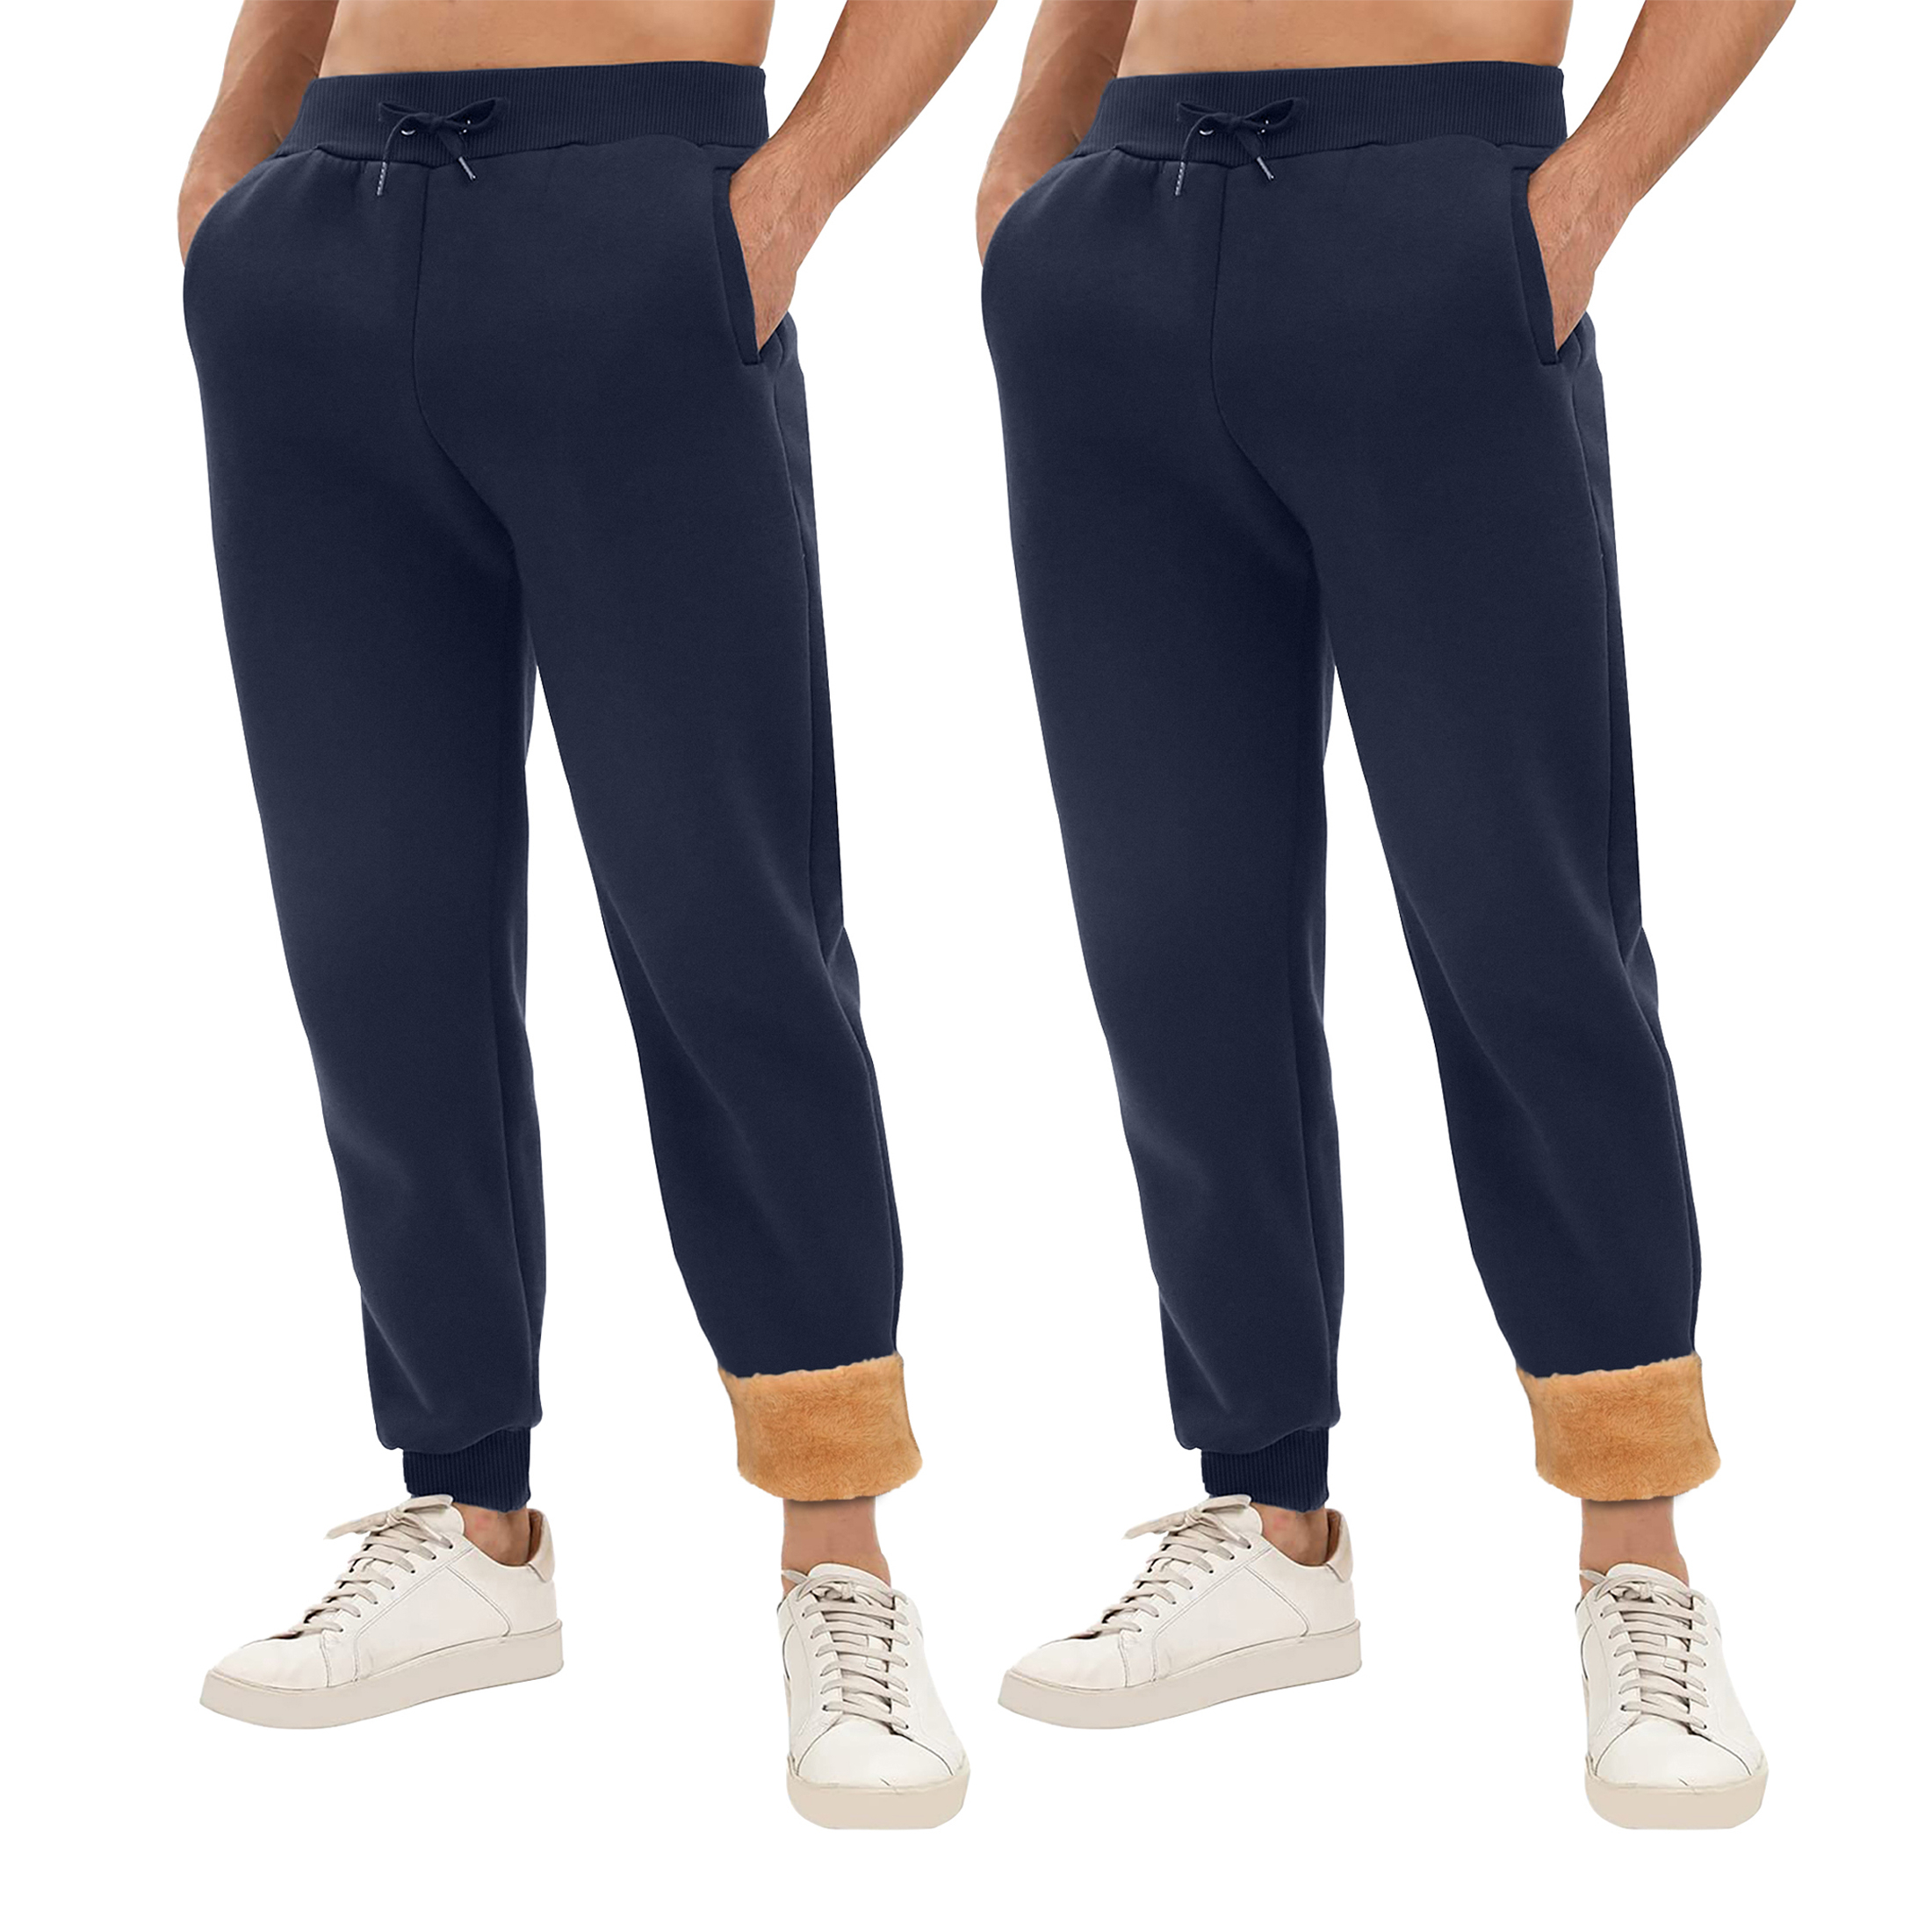 2-Pack: Men's Winter Warm Thick Sherpa Lined Jogger Track Pants With Pockets - Navy, Small